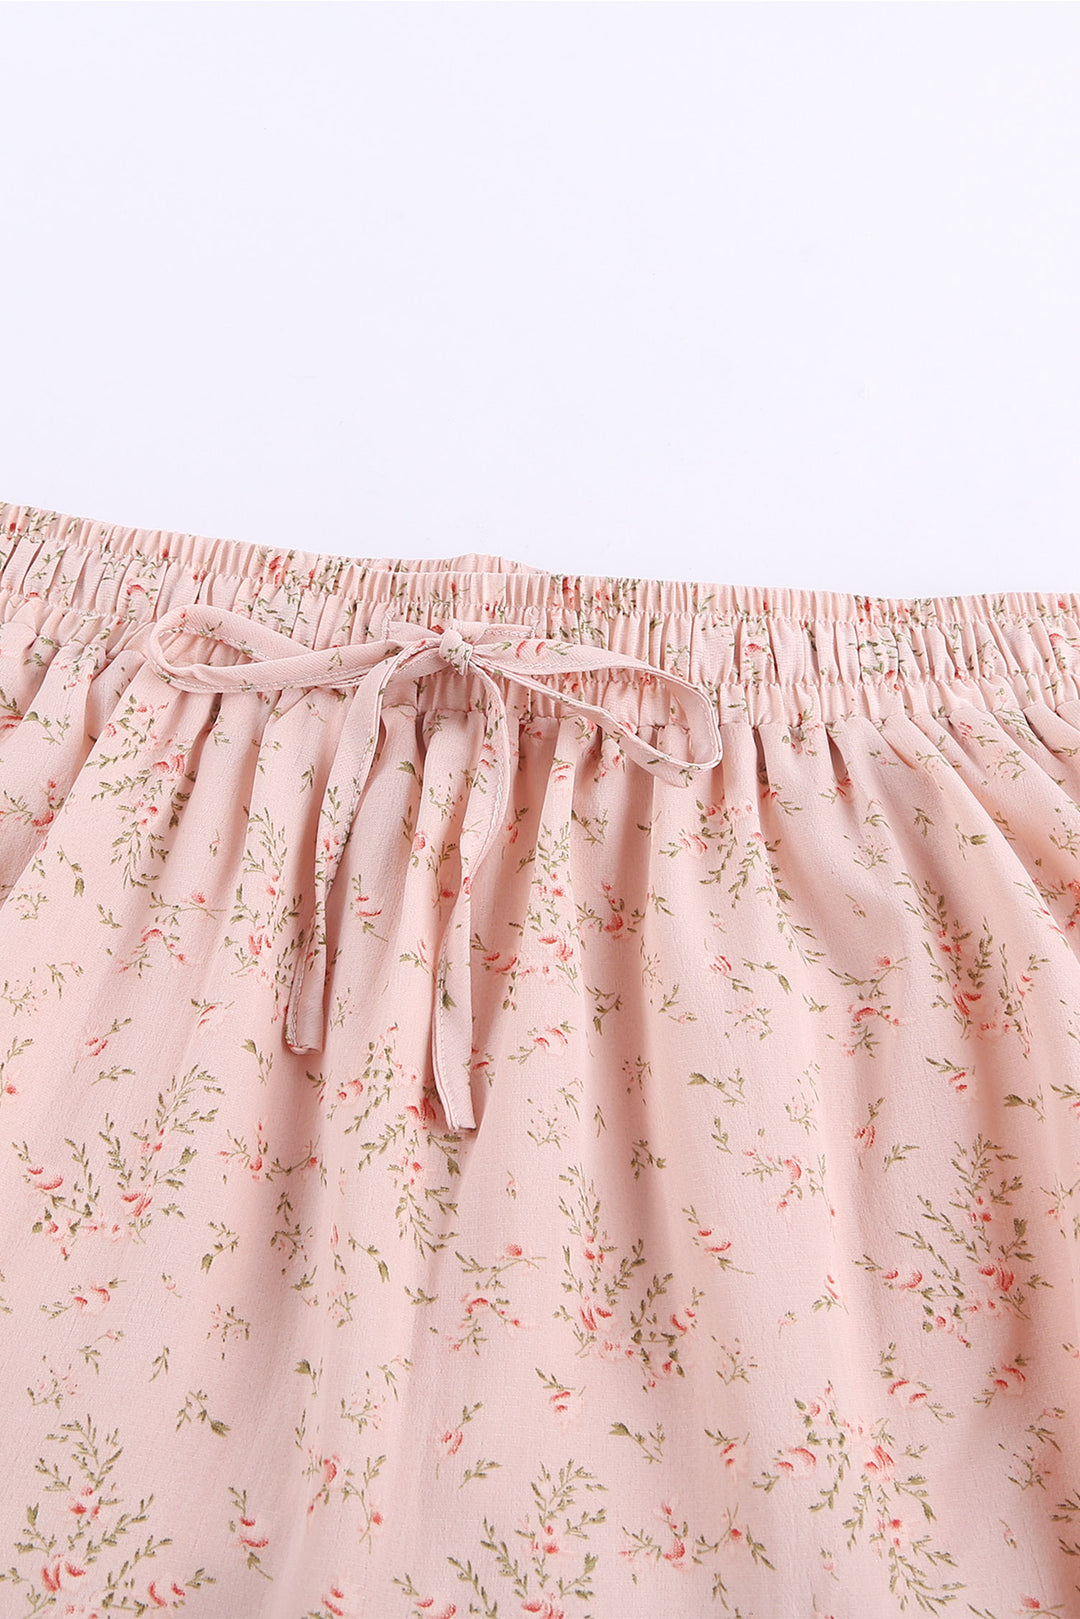 Summer Apricot Ruffled Floral Mini Skirt, Shop for cheap Summer Apricot Ruffled Floral Mini Skirt online? Buy at Modeshe.com on sale!